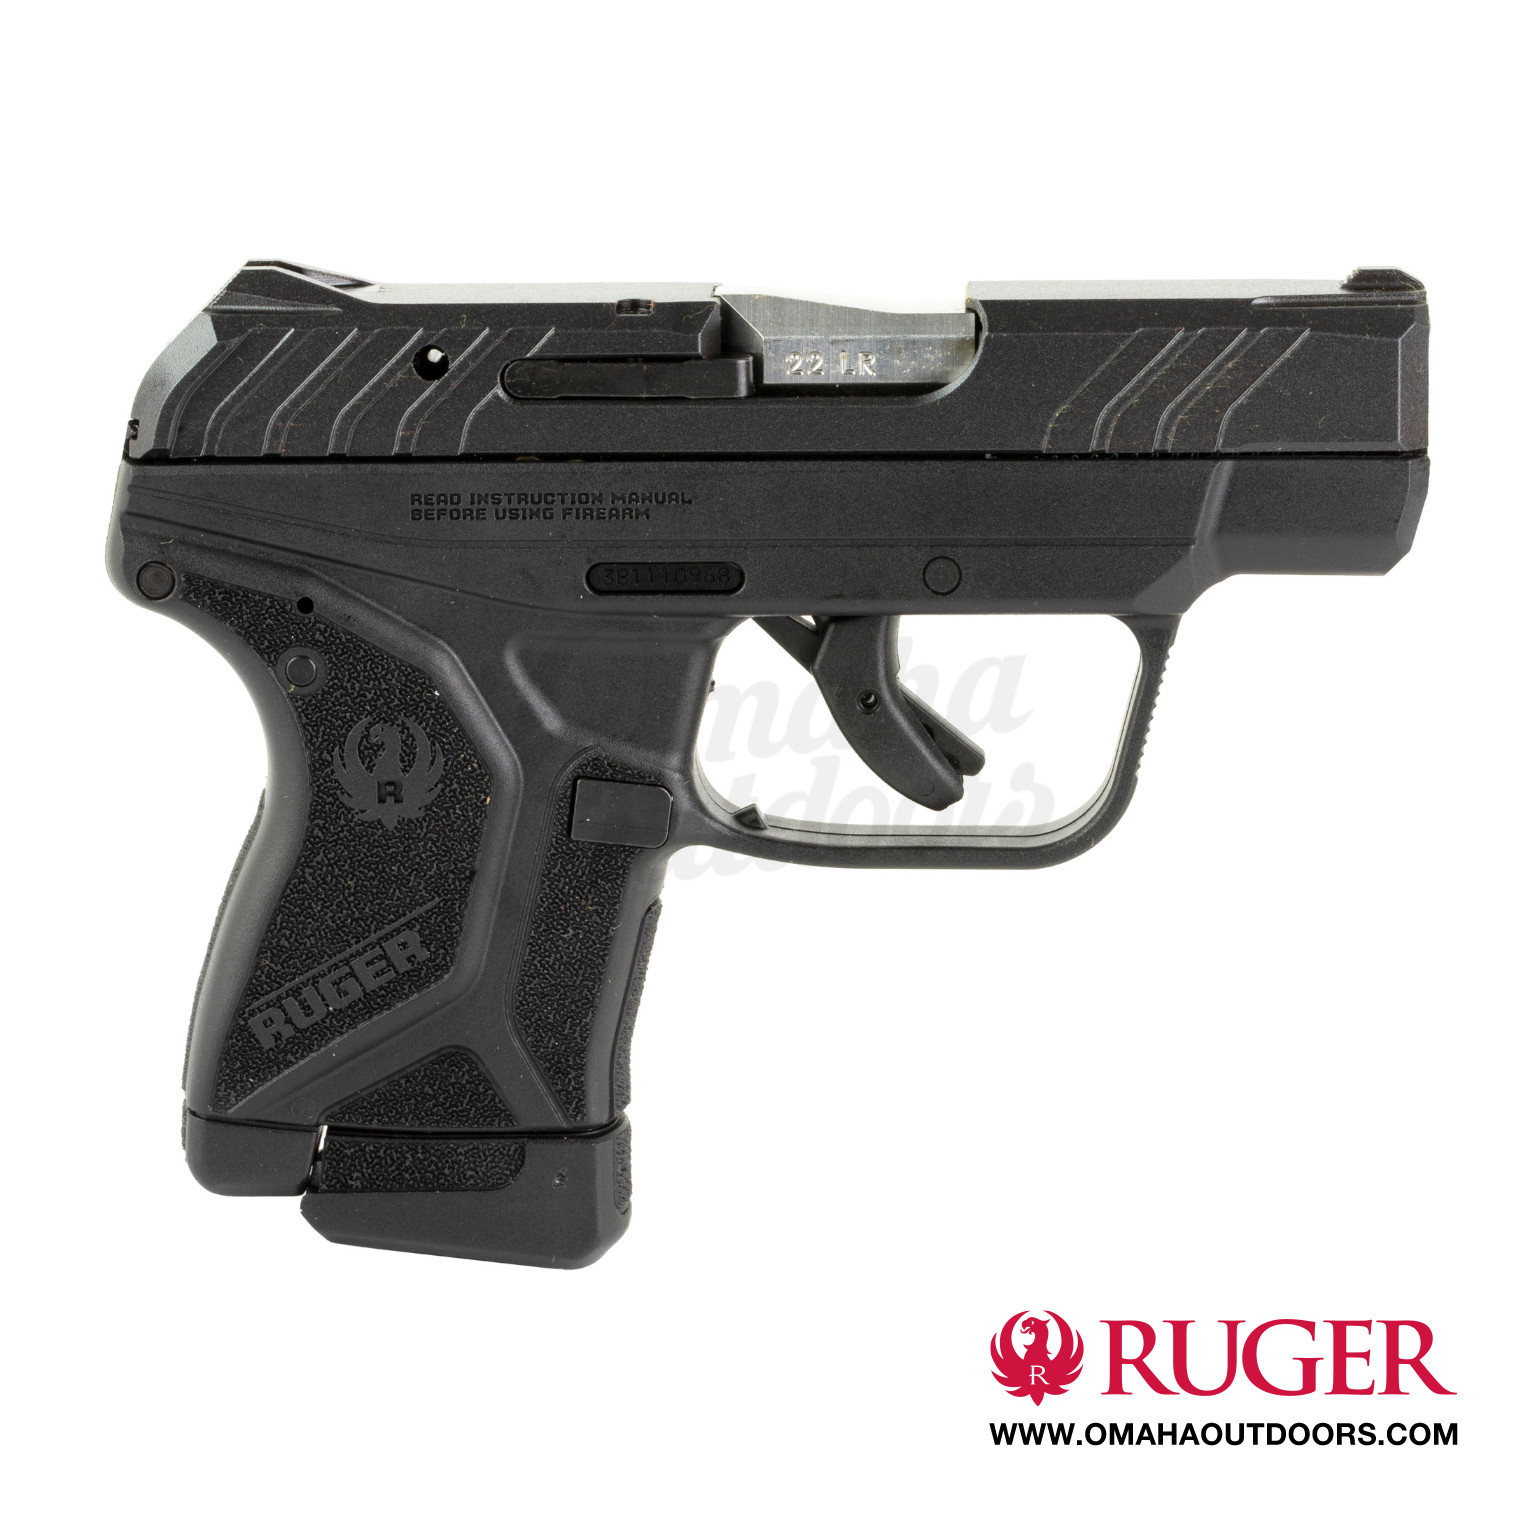 New to Ruger, please help me find this seamless upper. Looking to